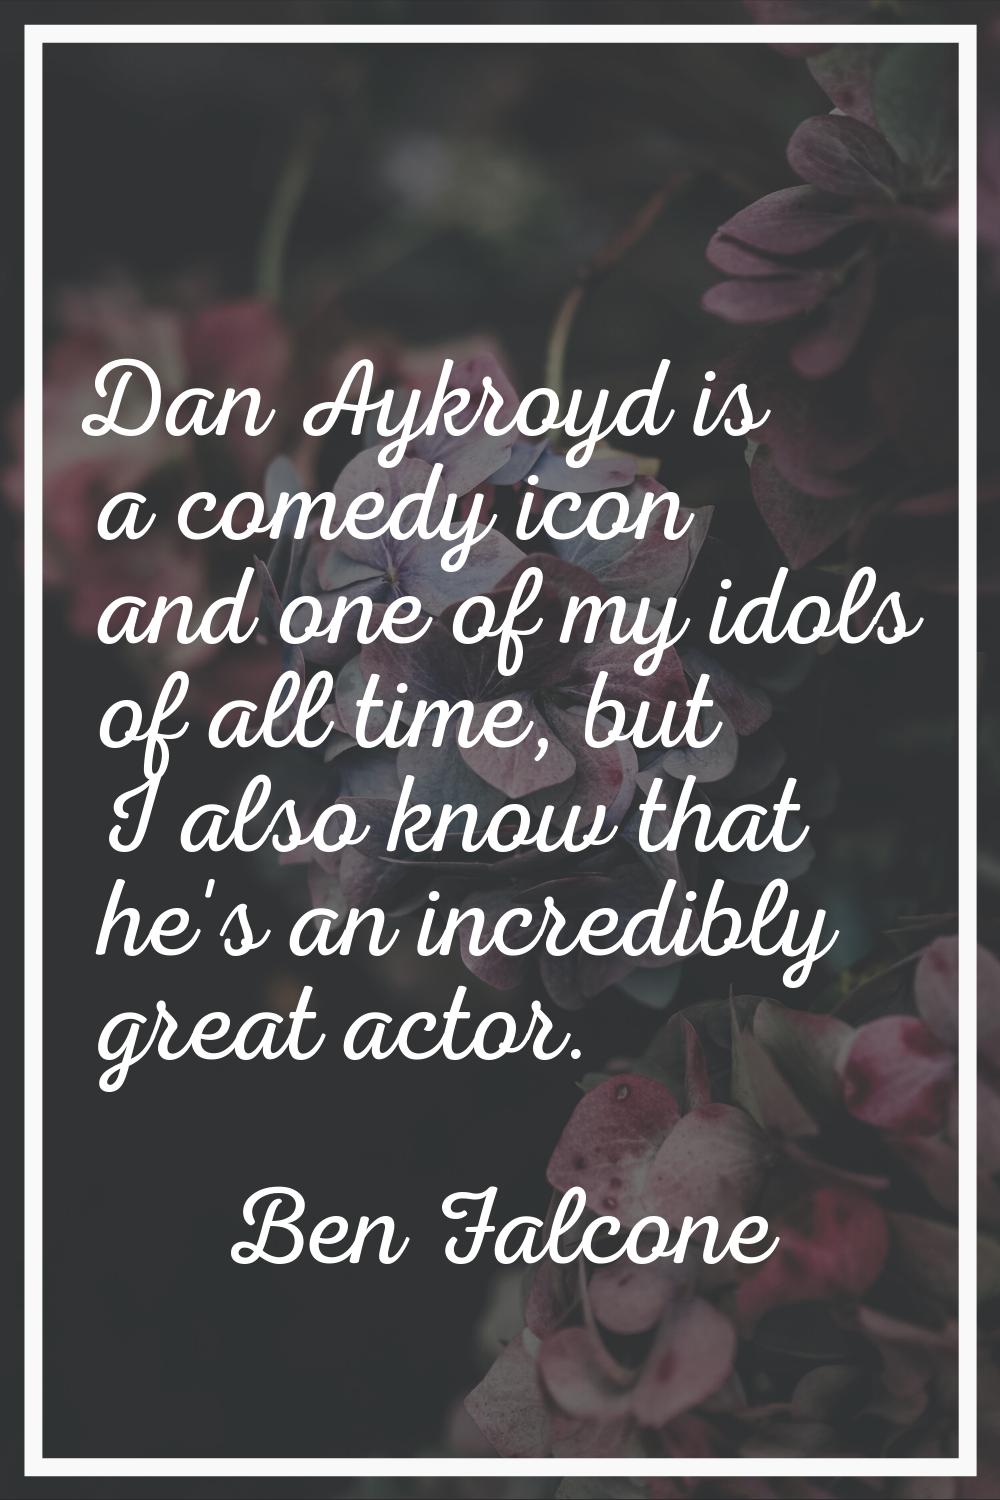 Dan Aykroyd is a comedy icon and one of my idols of all time, but I also know that he's an incredib